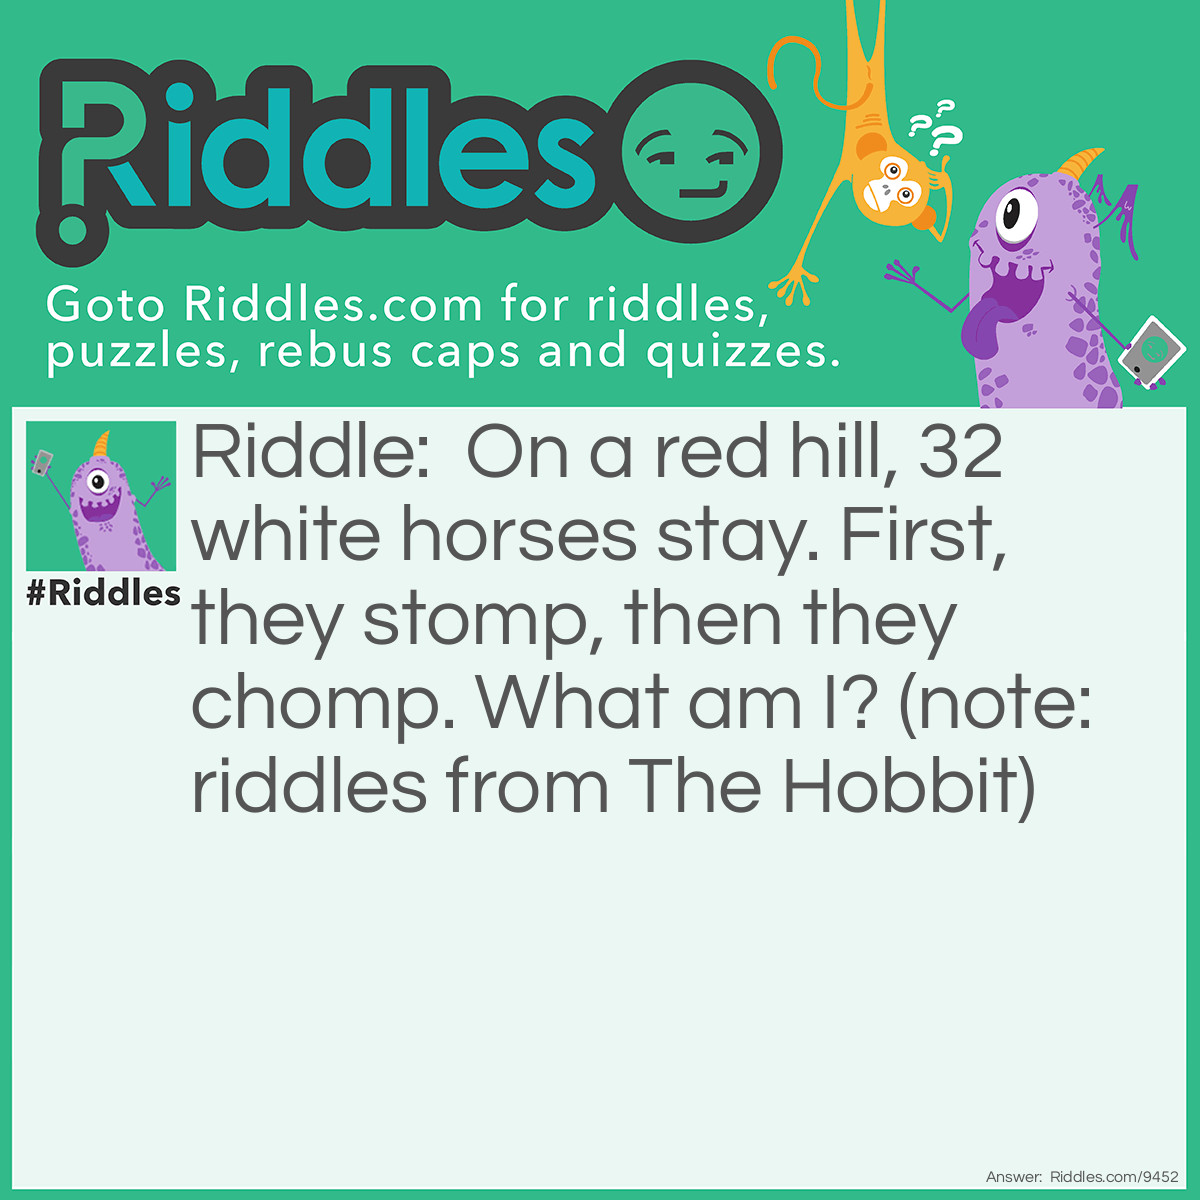 Riddle: On a red hill, 32 white horses stay. First, they stomp, then they chomp. What am I? (note: riddles from The Hobbit) Answer: Teeth.